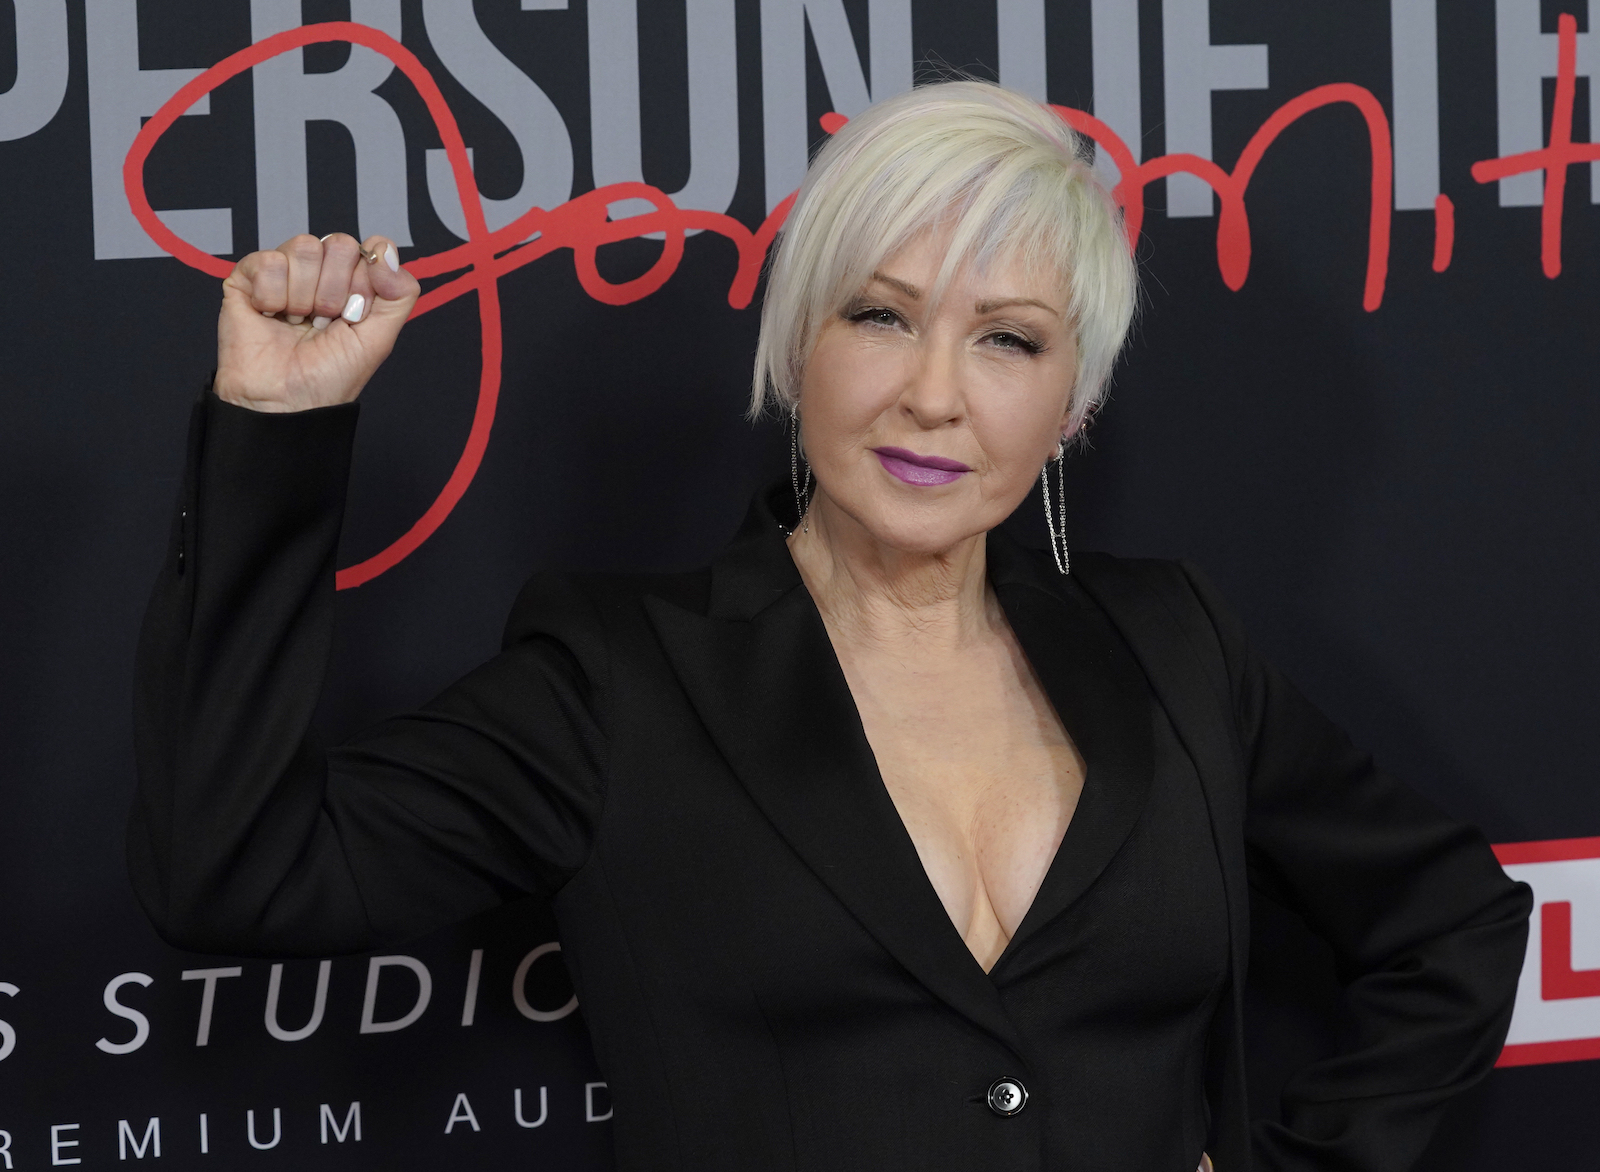 Cyndi Lauper Shares New Version of Abortion Rights Song After Roe Repeal